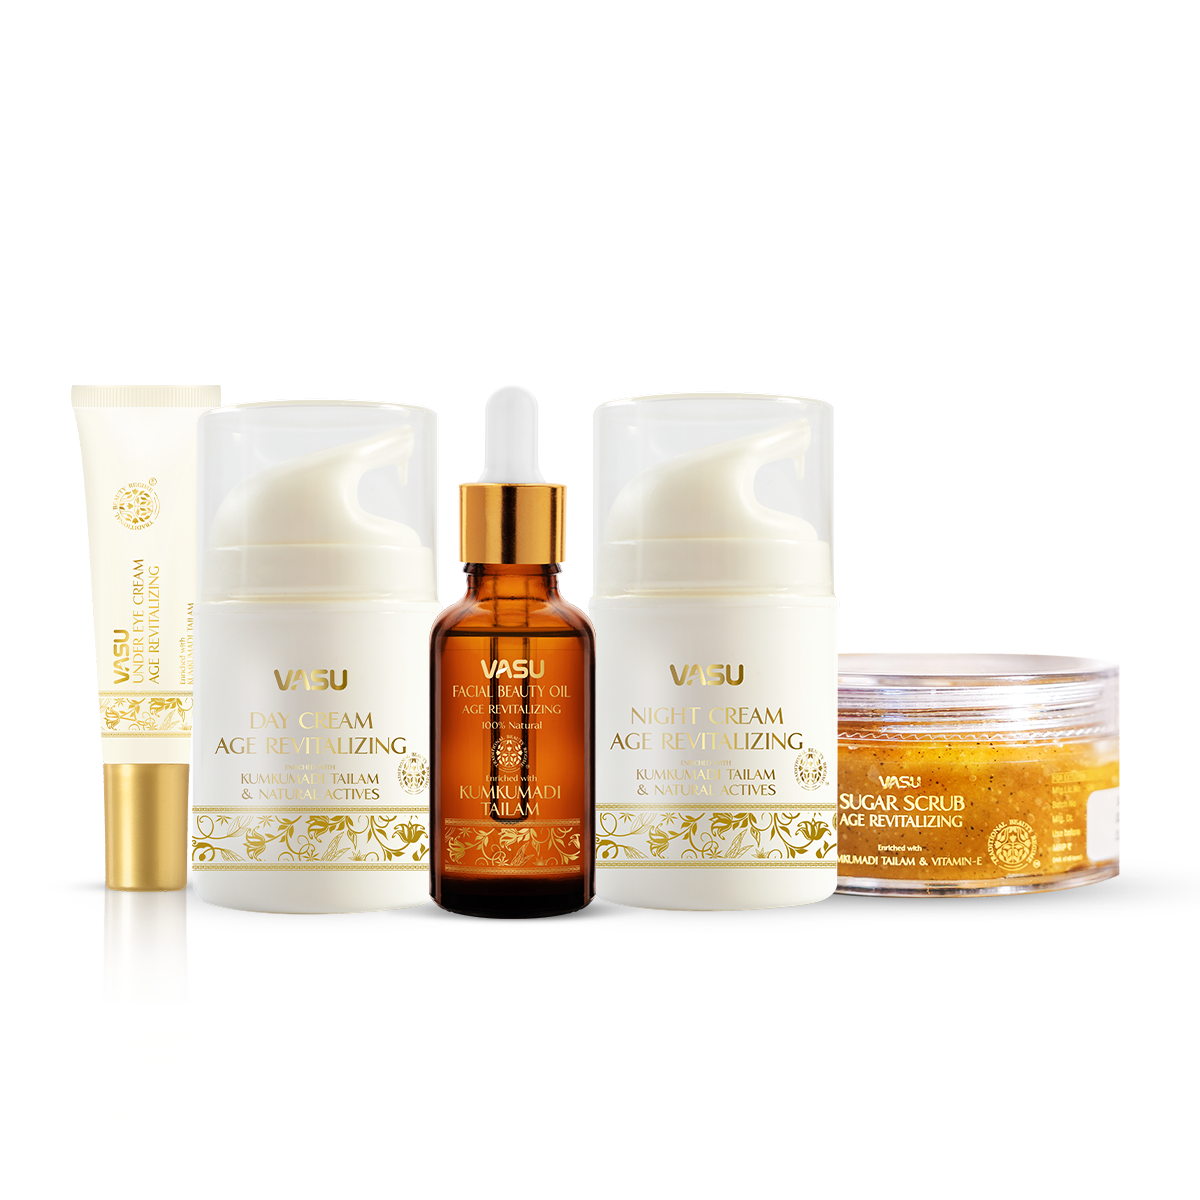 Vasu Age Revitalizing Kit with Kumkumadi Tailam - Maintain a Youthful Appearance of Your Skin - Evens skin tone, Reduces Hyperpigmentation, Fine lines & Wrinkles